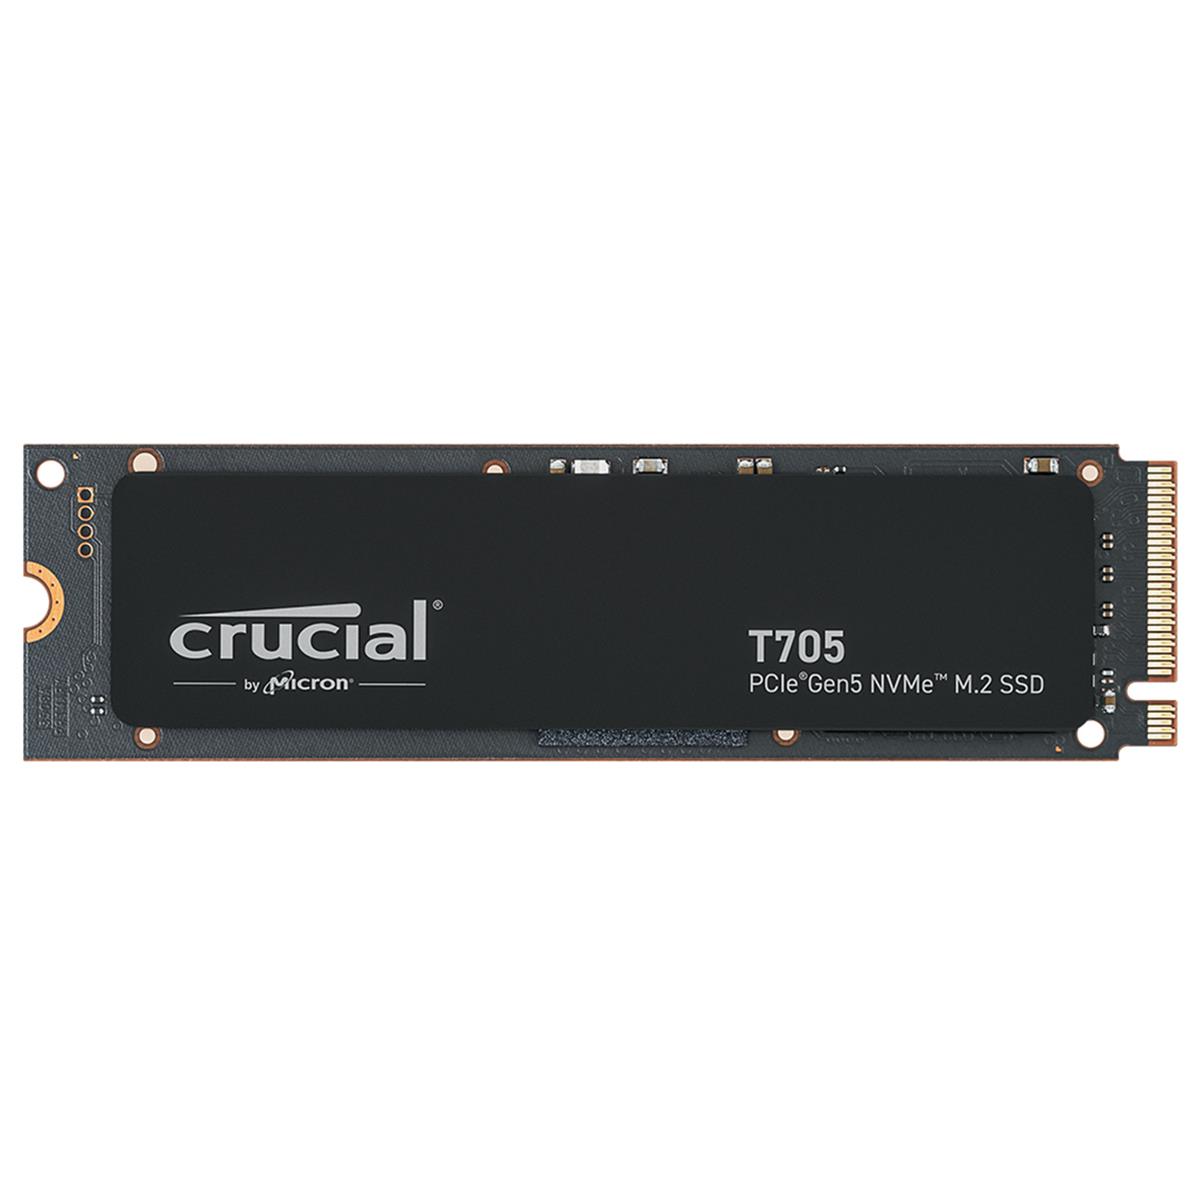 Image of Crucial T705 PCIe Gen5 NVMe M.2 SSD Internal Gaming SSD 1TB Without Heatsink